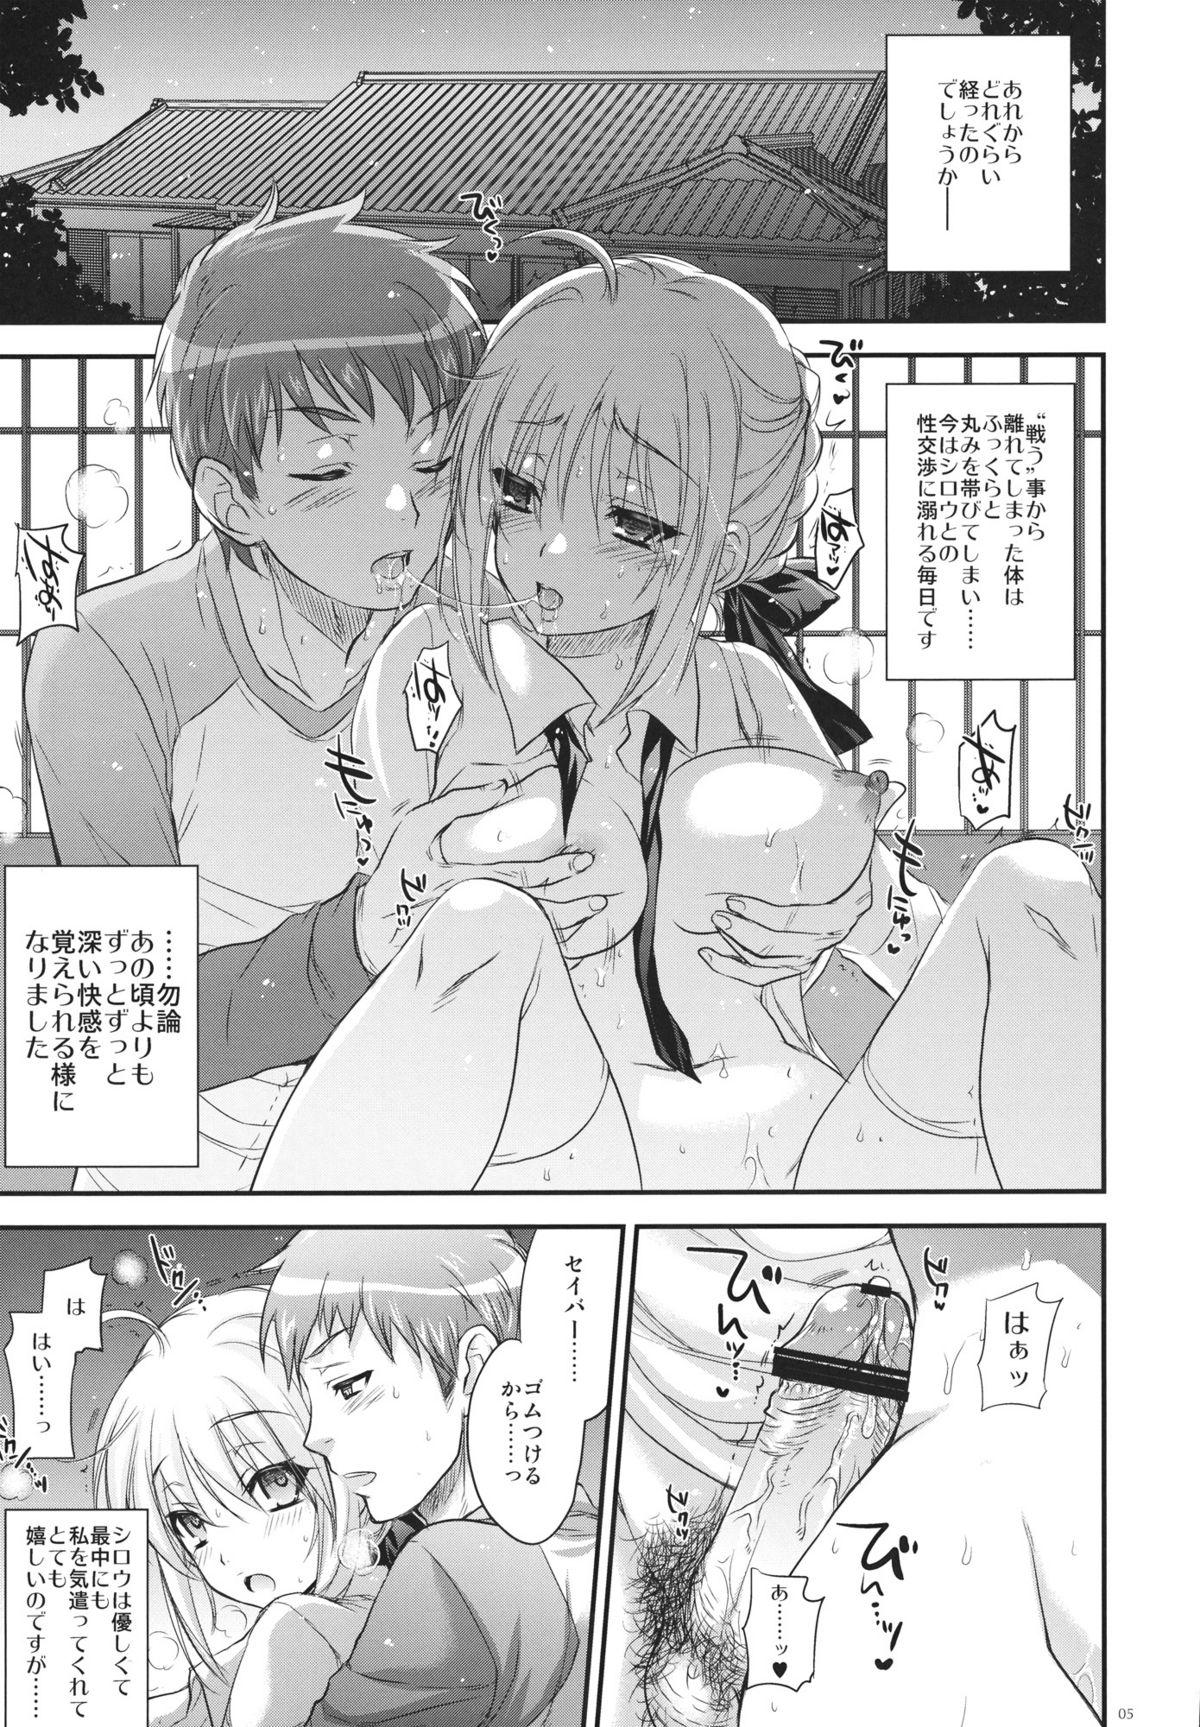 Ejaculations GARIGARI 38 - Fate stay night Transexual - Page 4